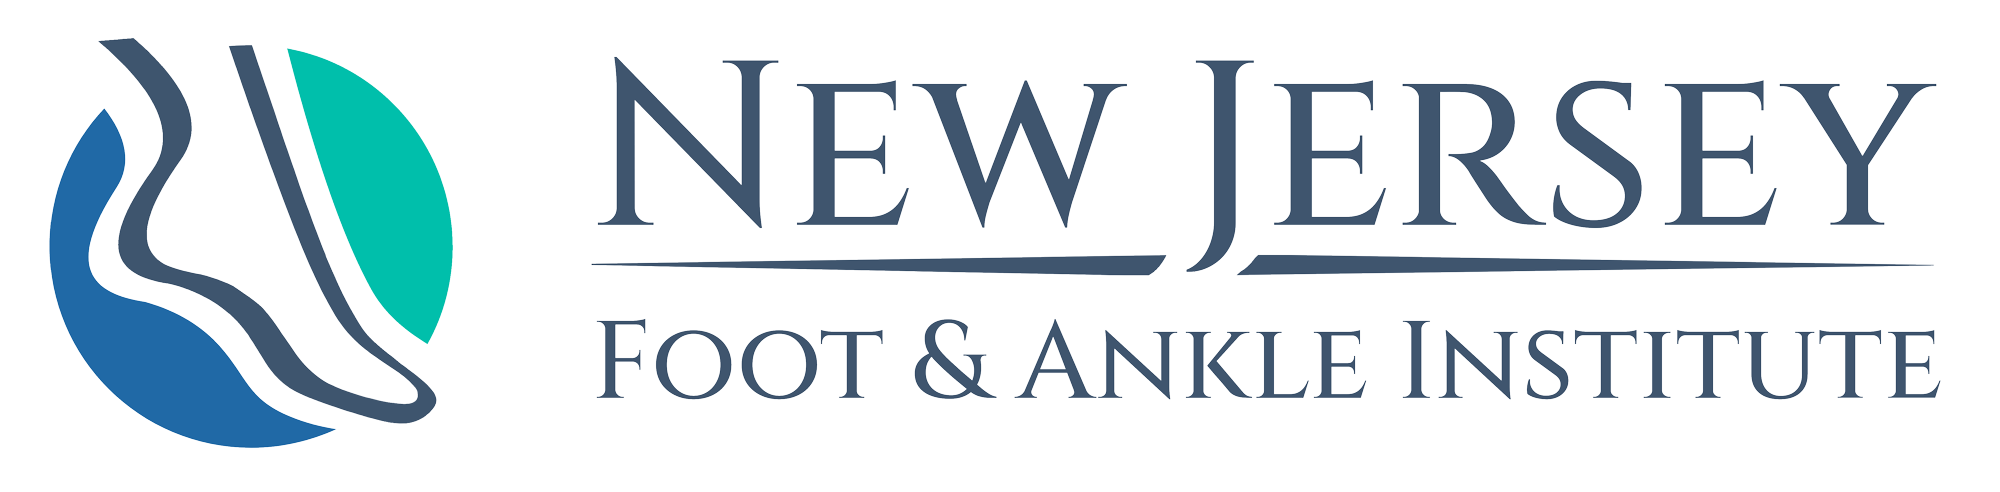 New Jersey Foot and Ankle Institute - high res